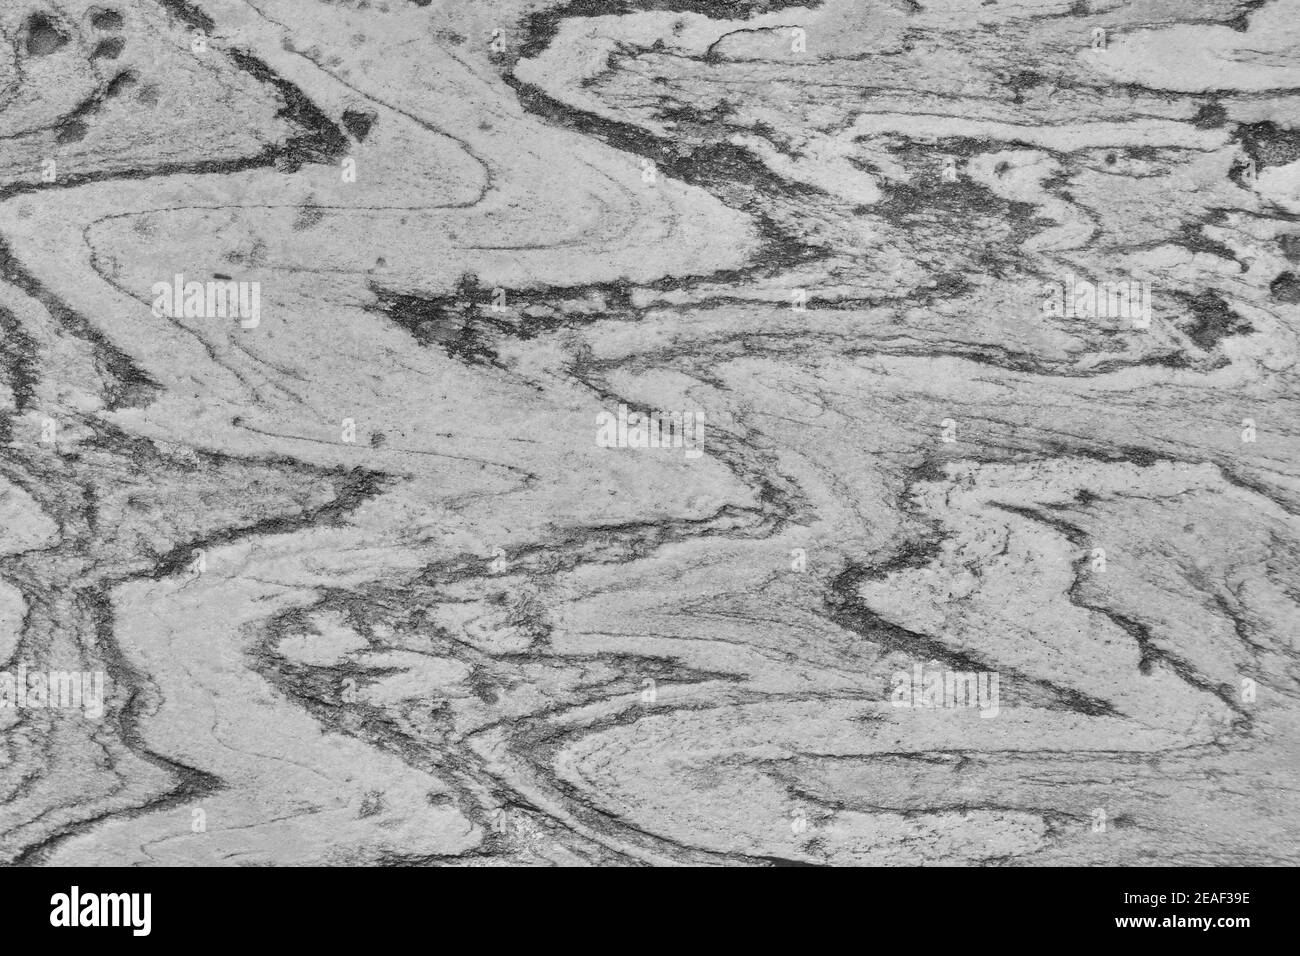 Rock texture with curved lines. Background old stone surface. Stock Photo